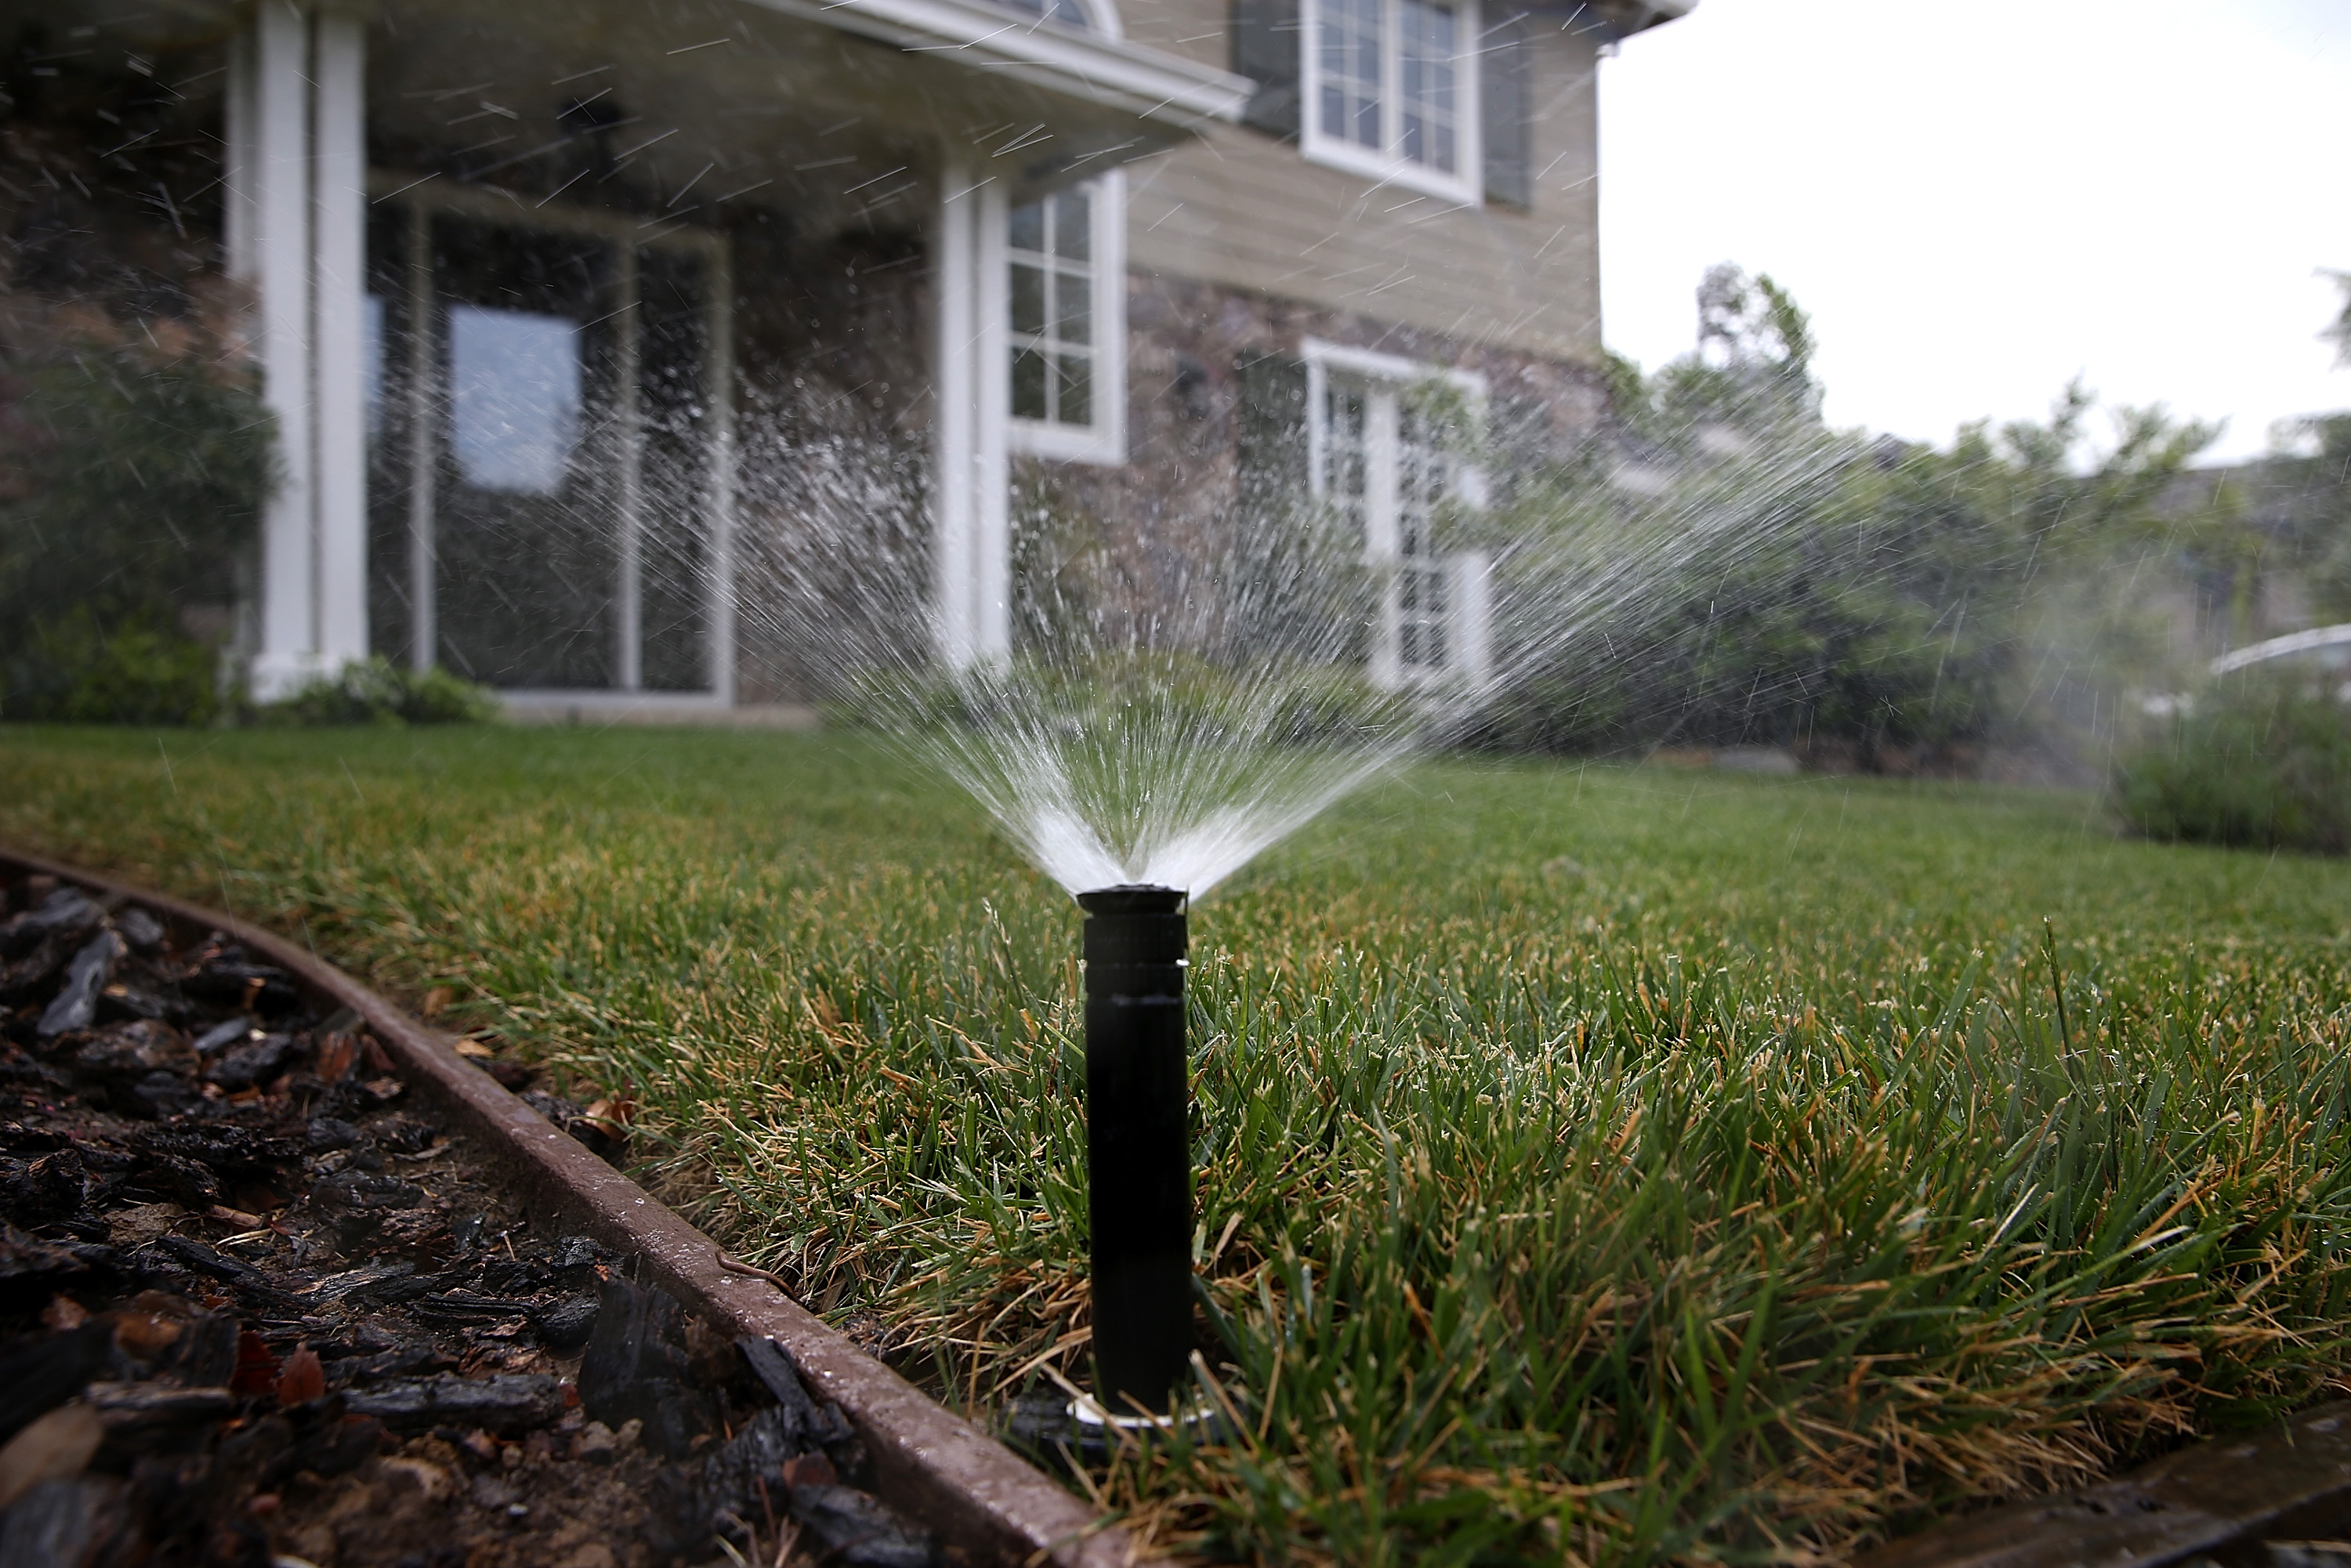 A sprinkler waters a lawn on April 7, 2015 in Walnut Creek, California. (Justin Sullivan—Getty Images)